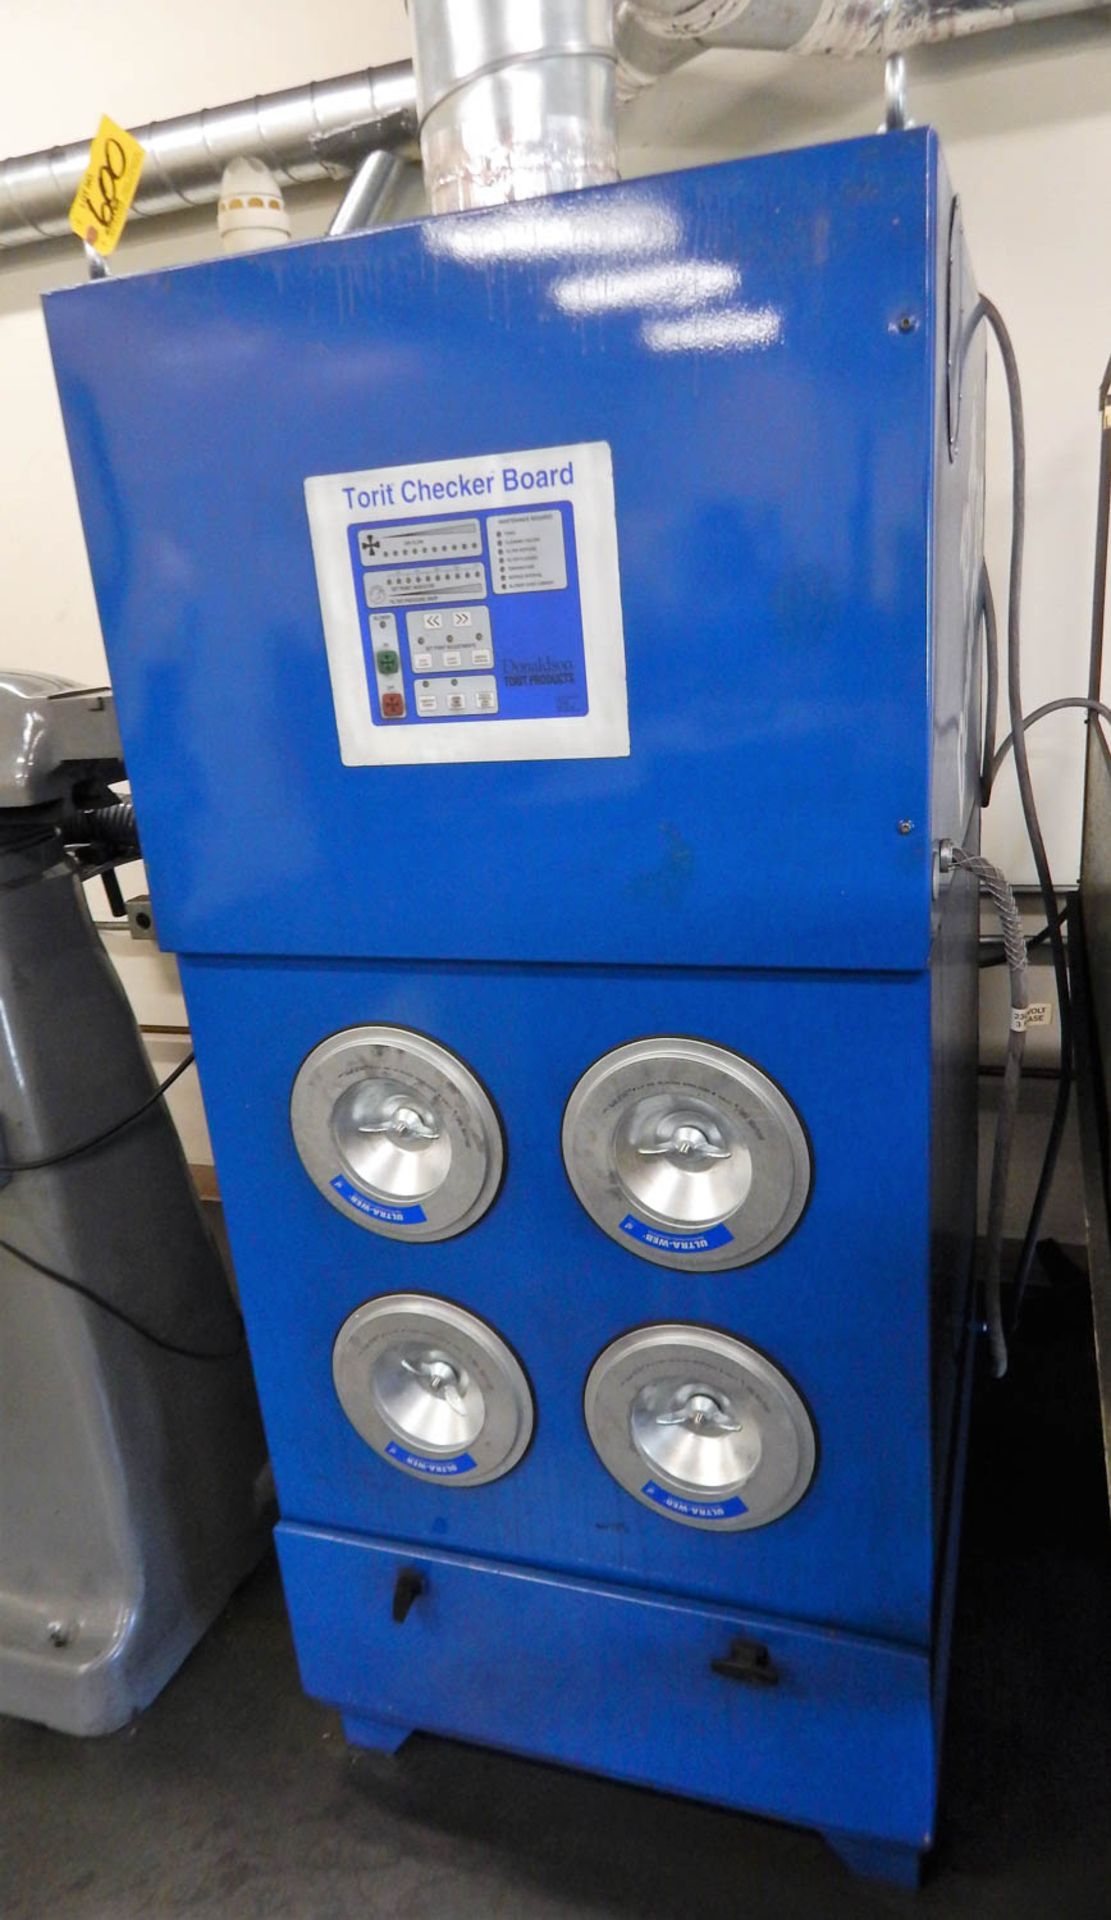 TORIT DOWNFLO DUST COLLECTION SYSTEM, WITH TORIT CHECKER BOARD CONTROLS